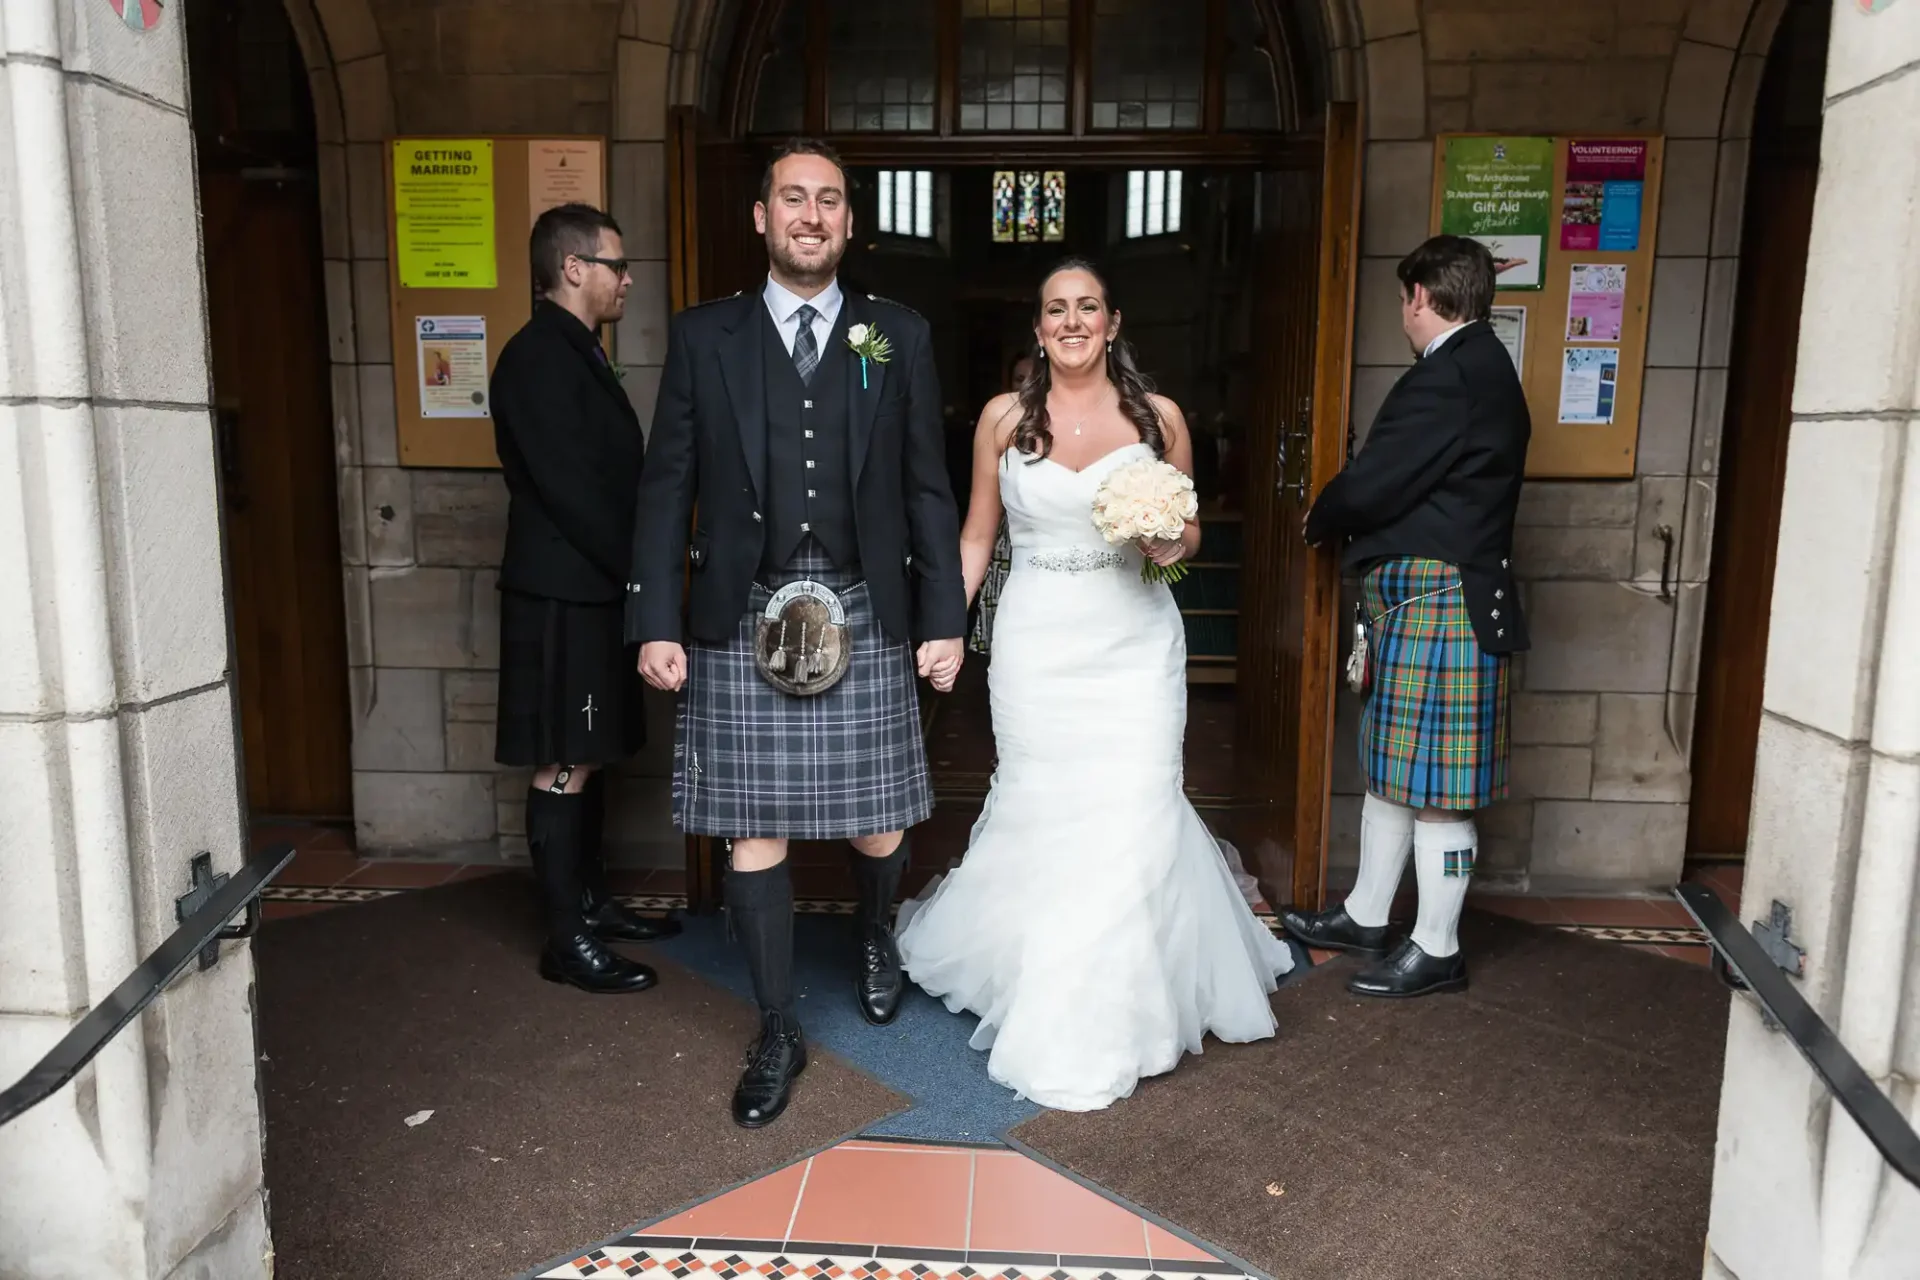 A smiling bride and groom, dressed traditionally (groom in a kilt), exit a church, flanked by two ushers in kilts.